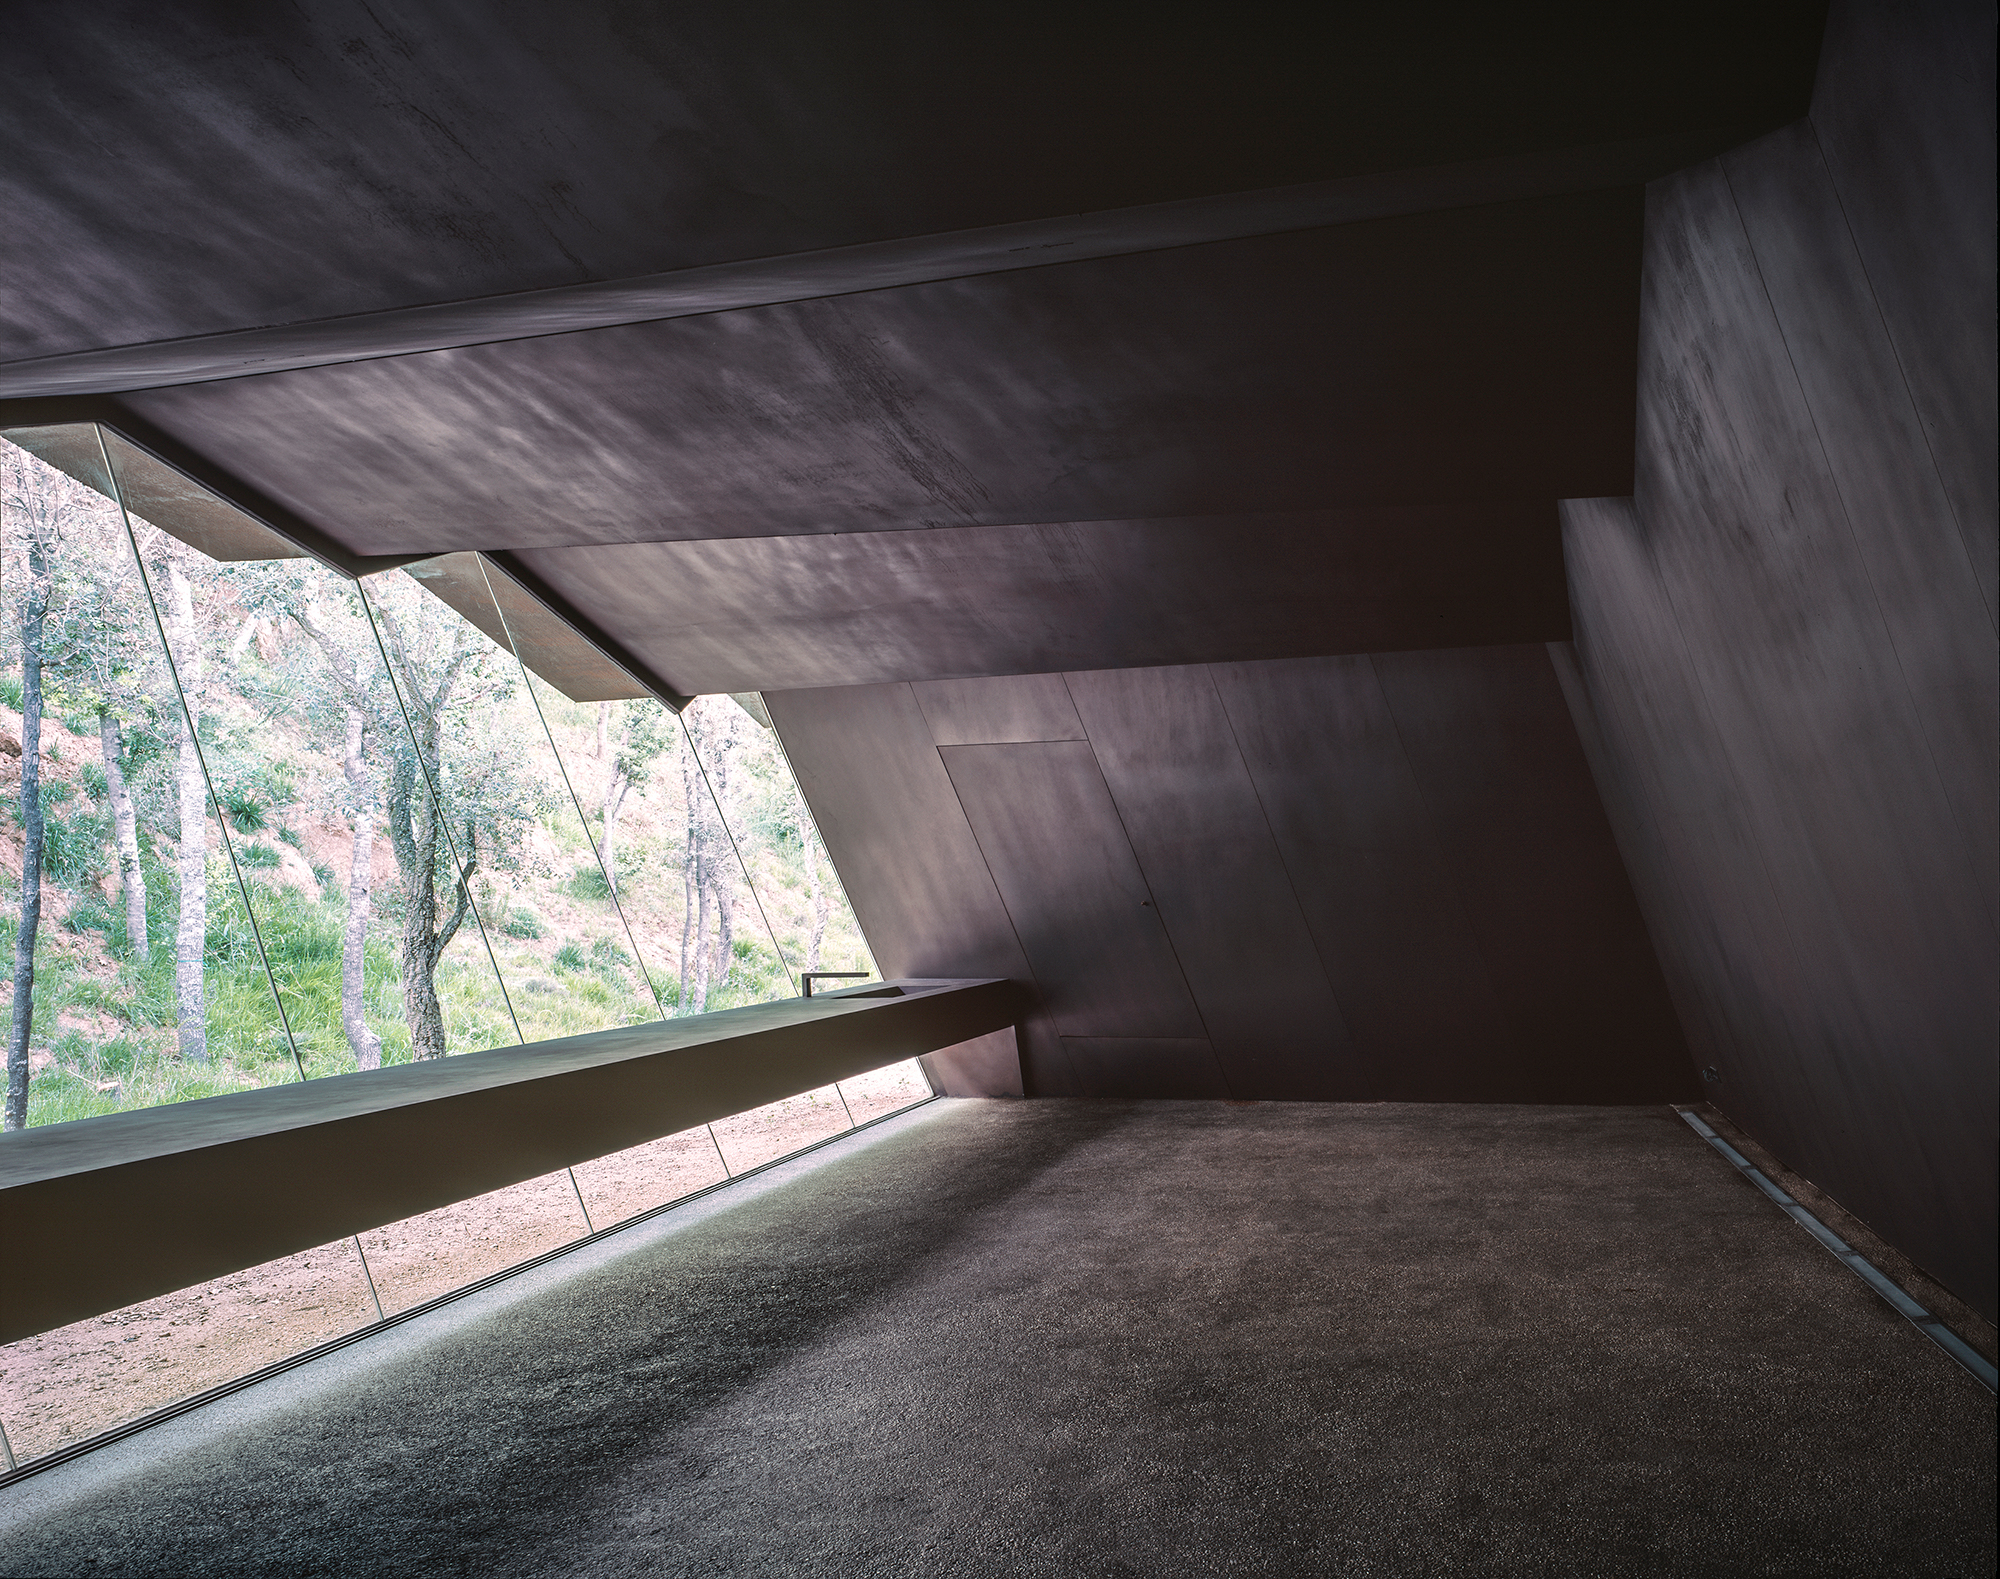 Bell-Lloc winery designed by RCR Arquitectes in Palamó, Spain. 